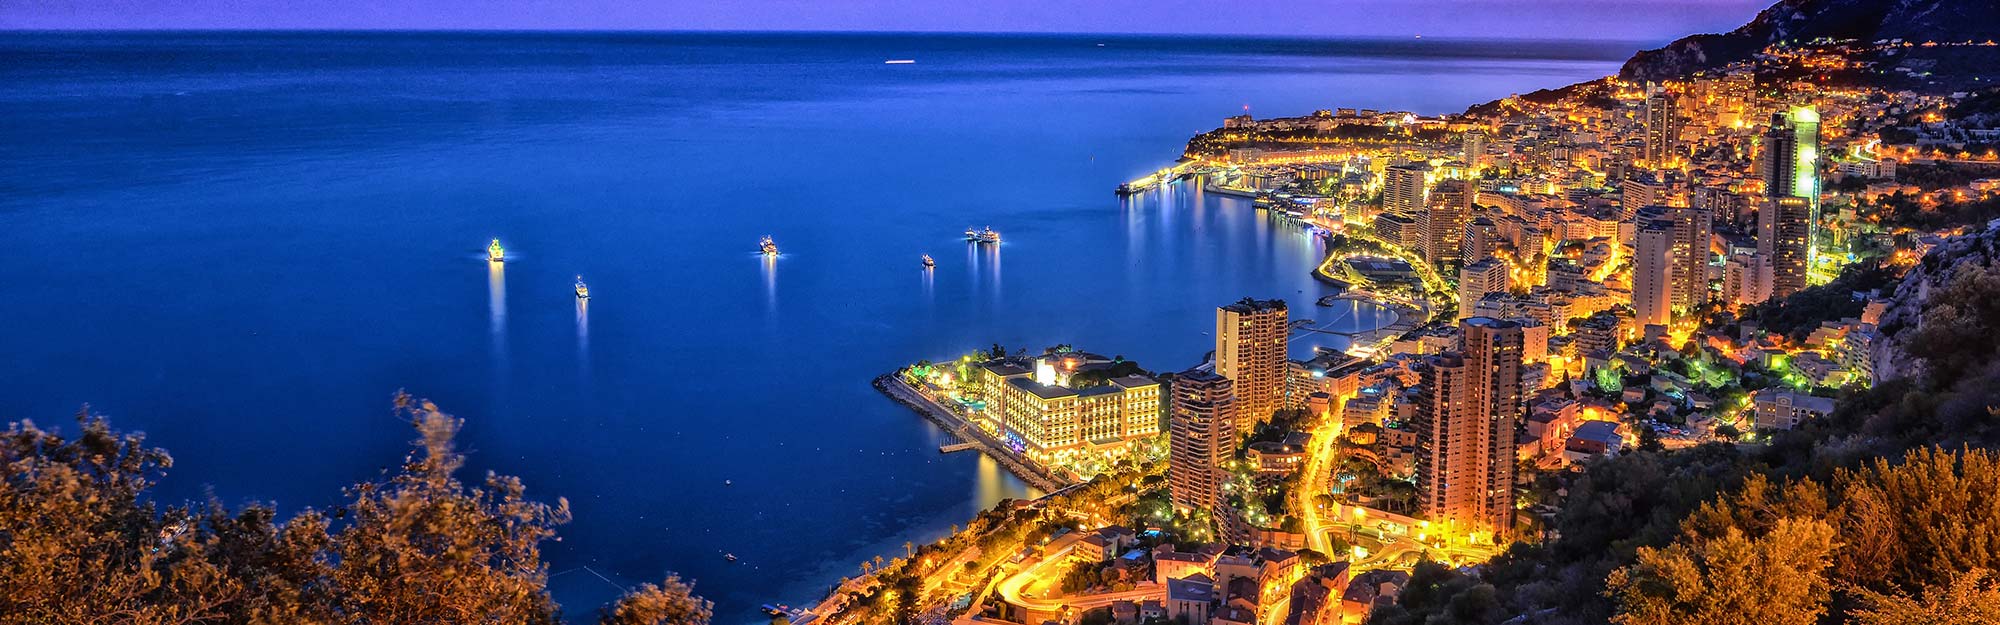 view from the hills overlooking monaco and the bay at night